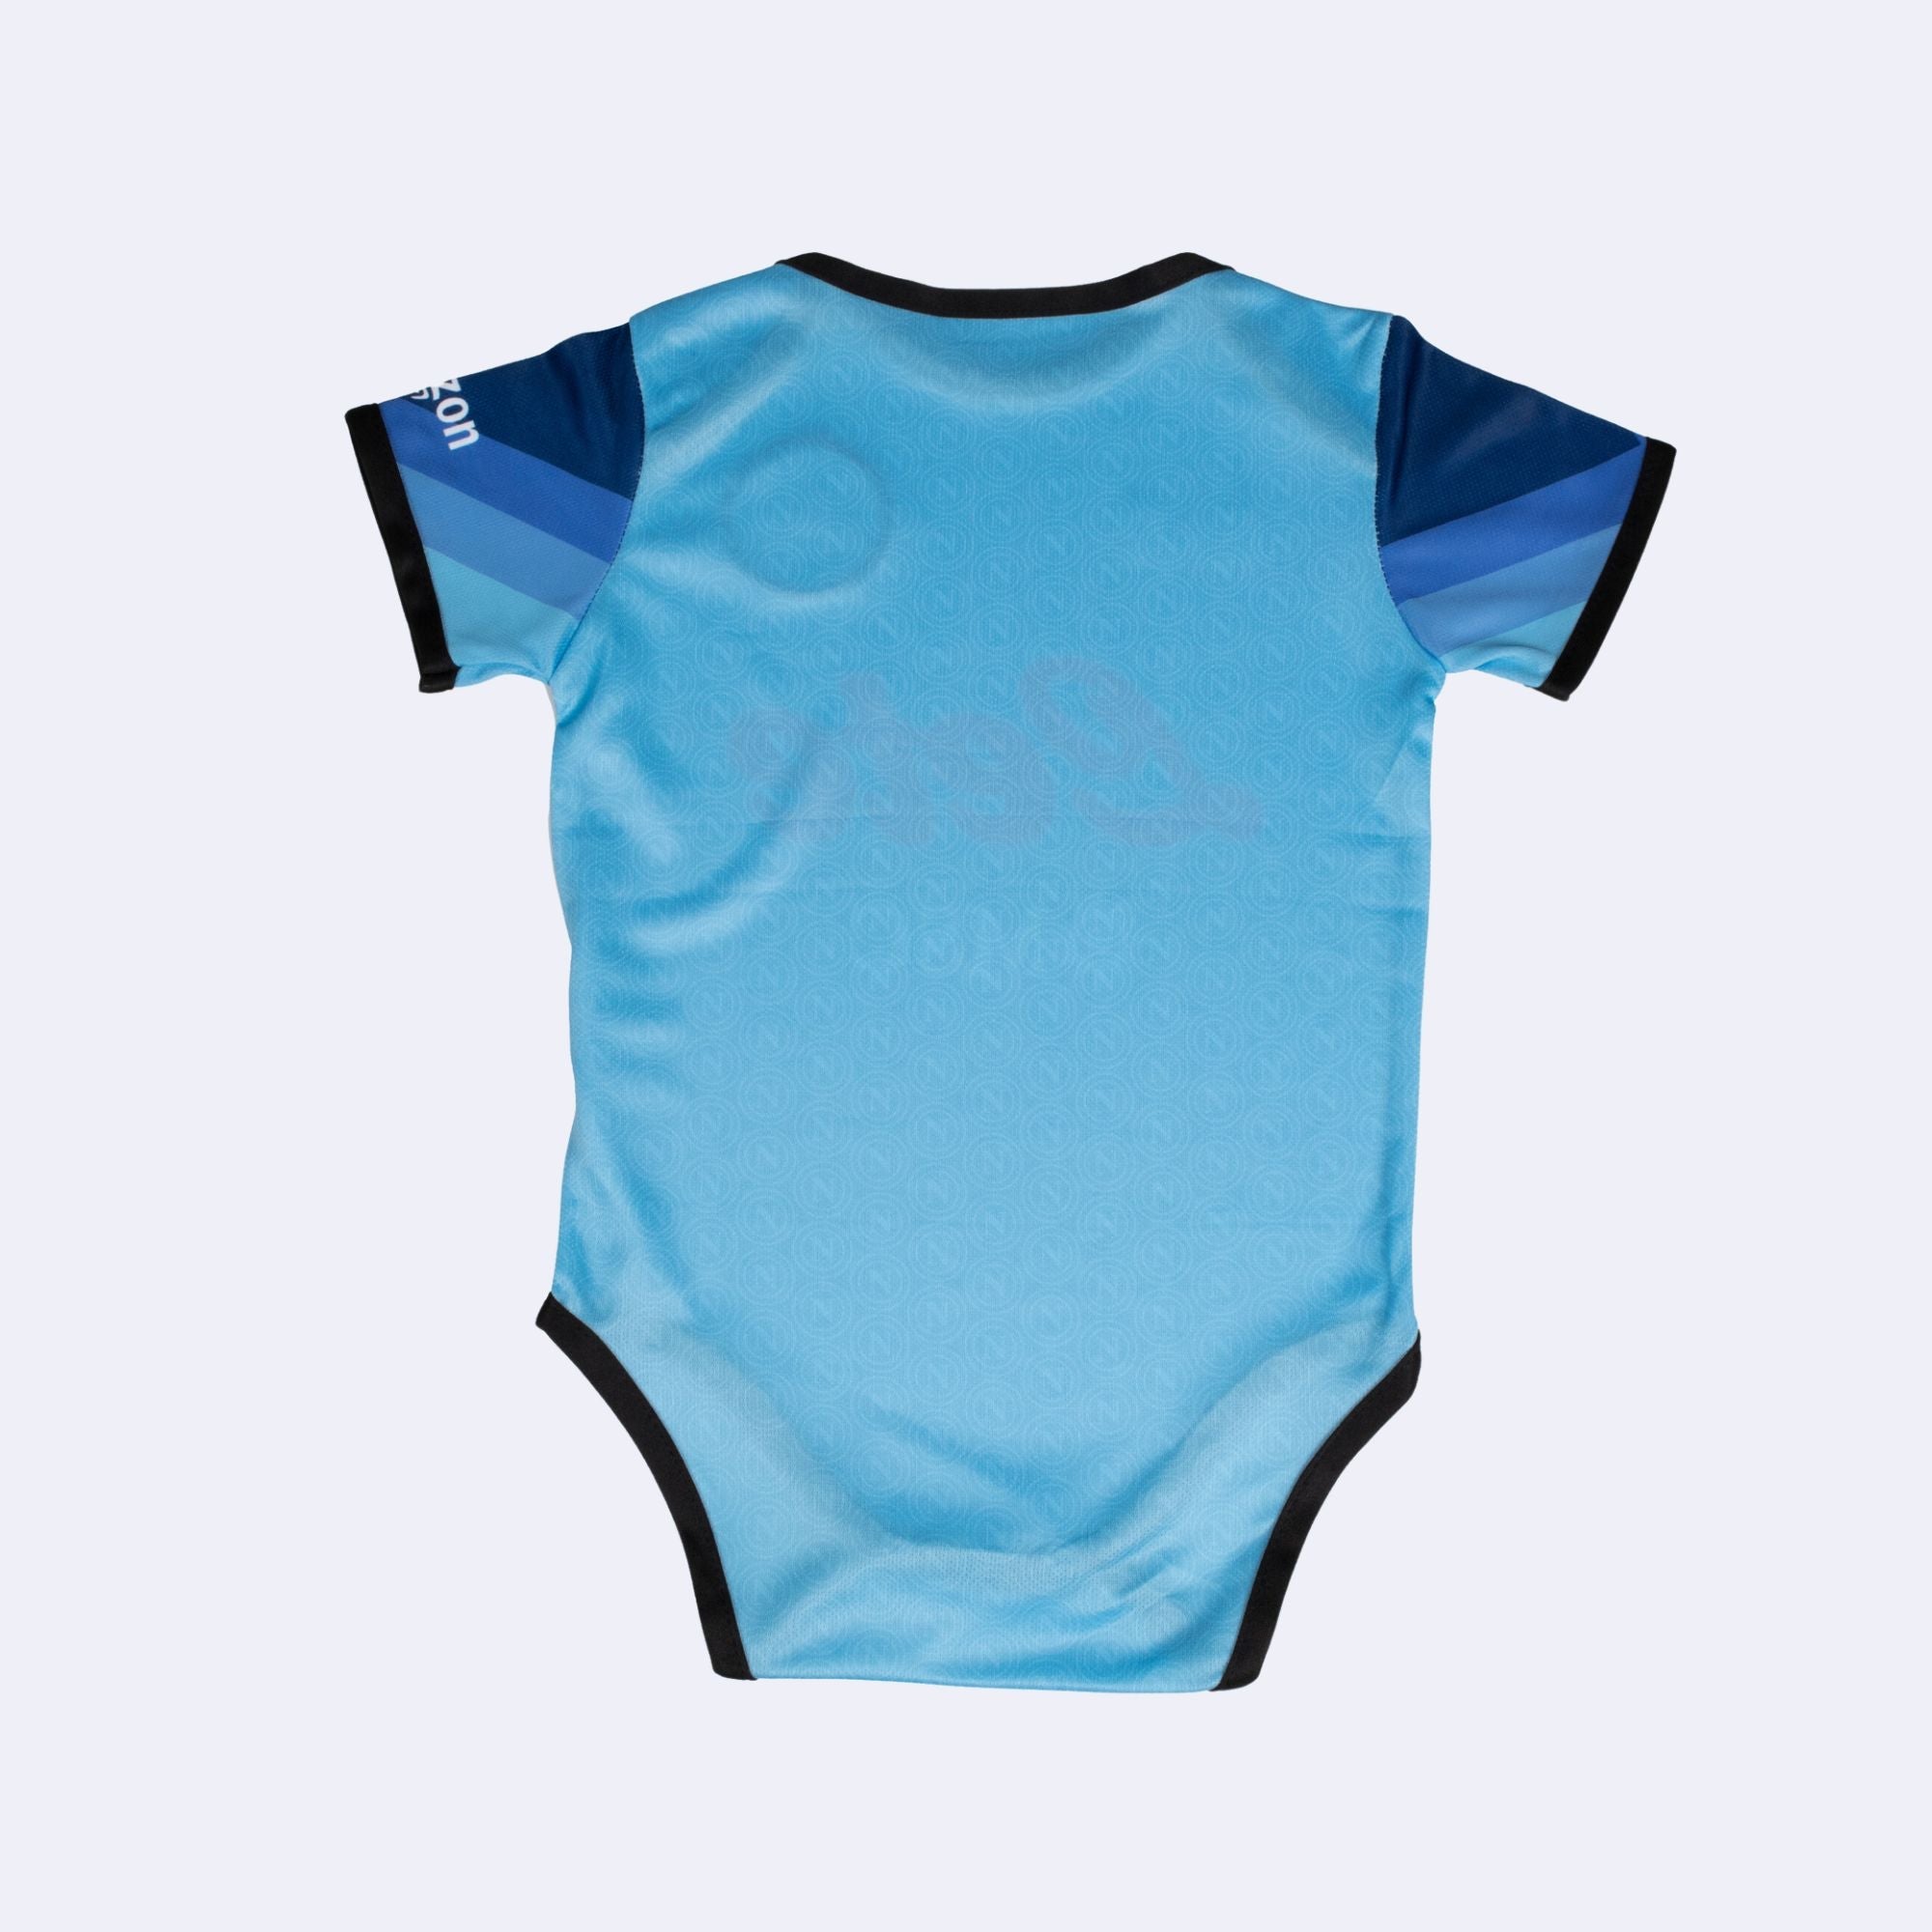 Napoli Baby Home Jersey - Adorable 2023/24 Fanwear